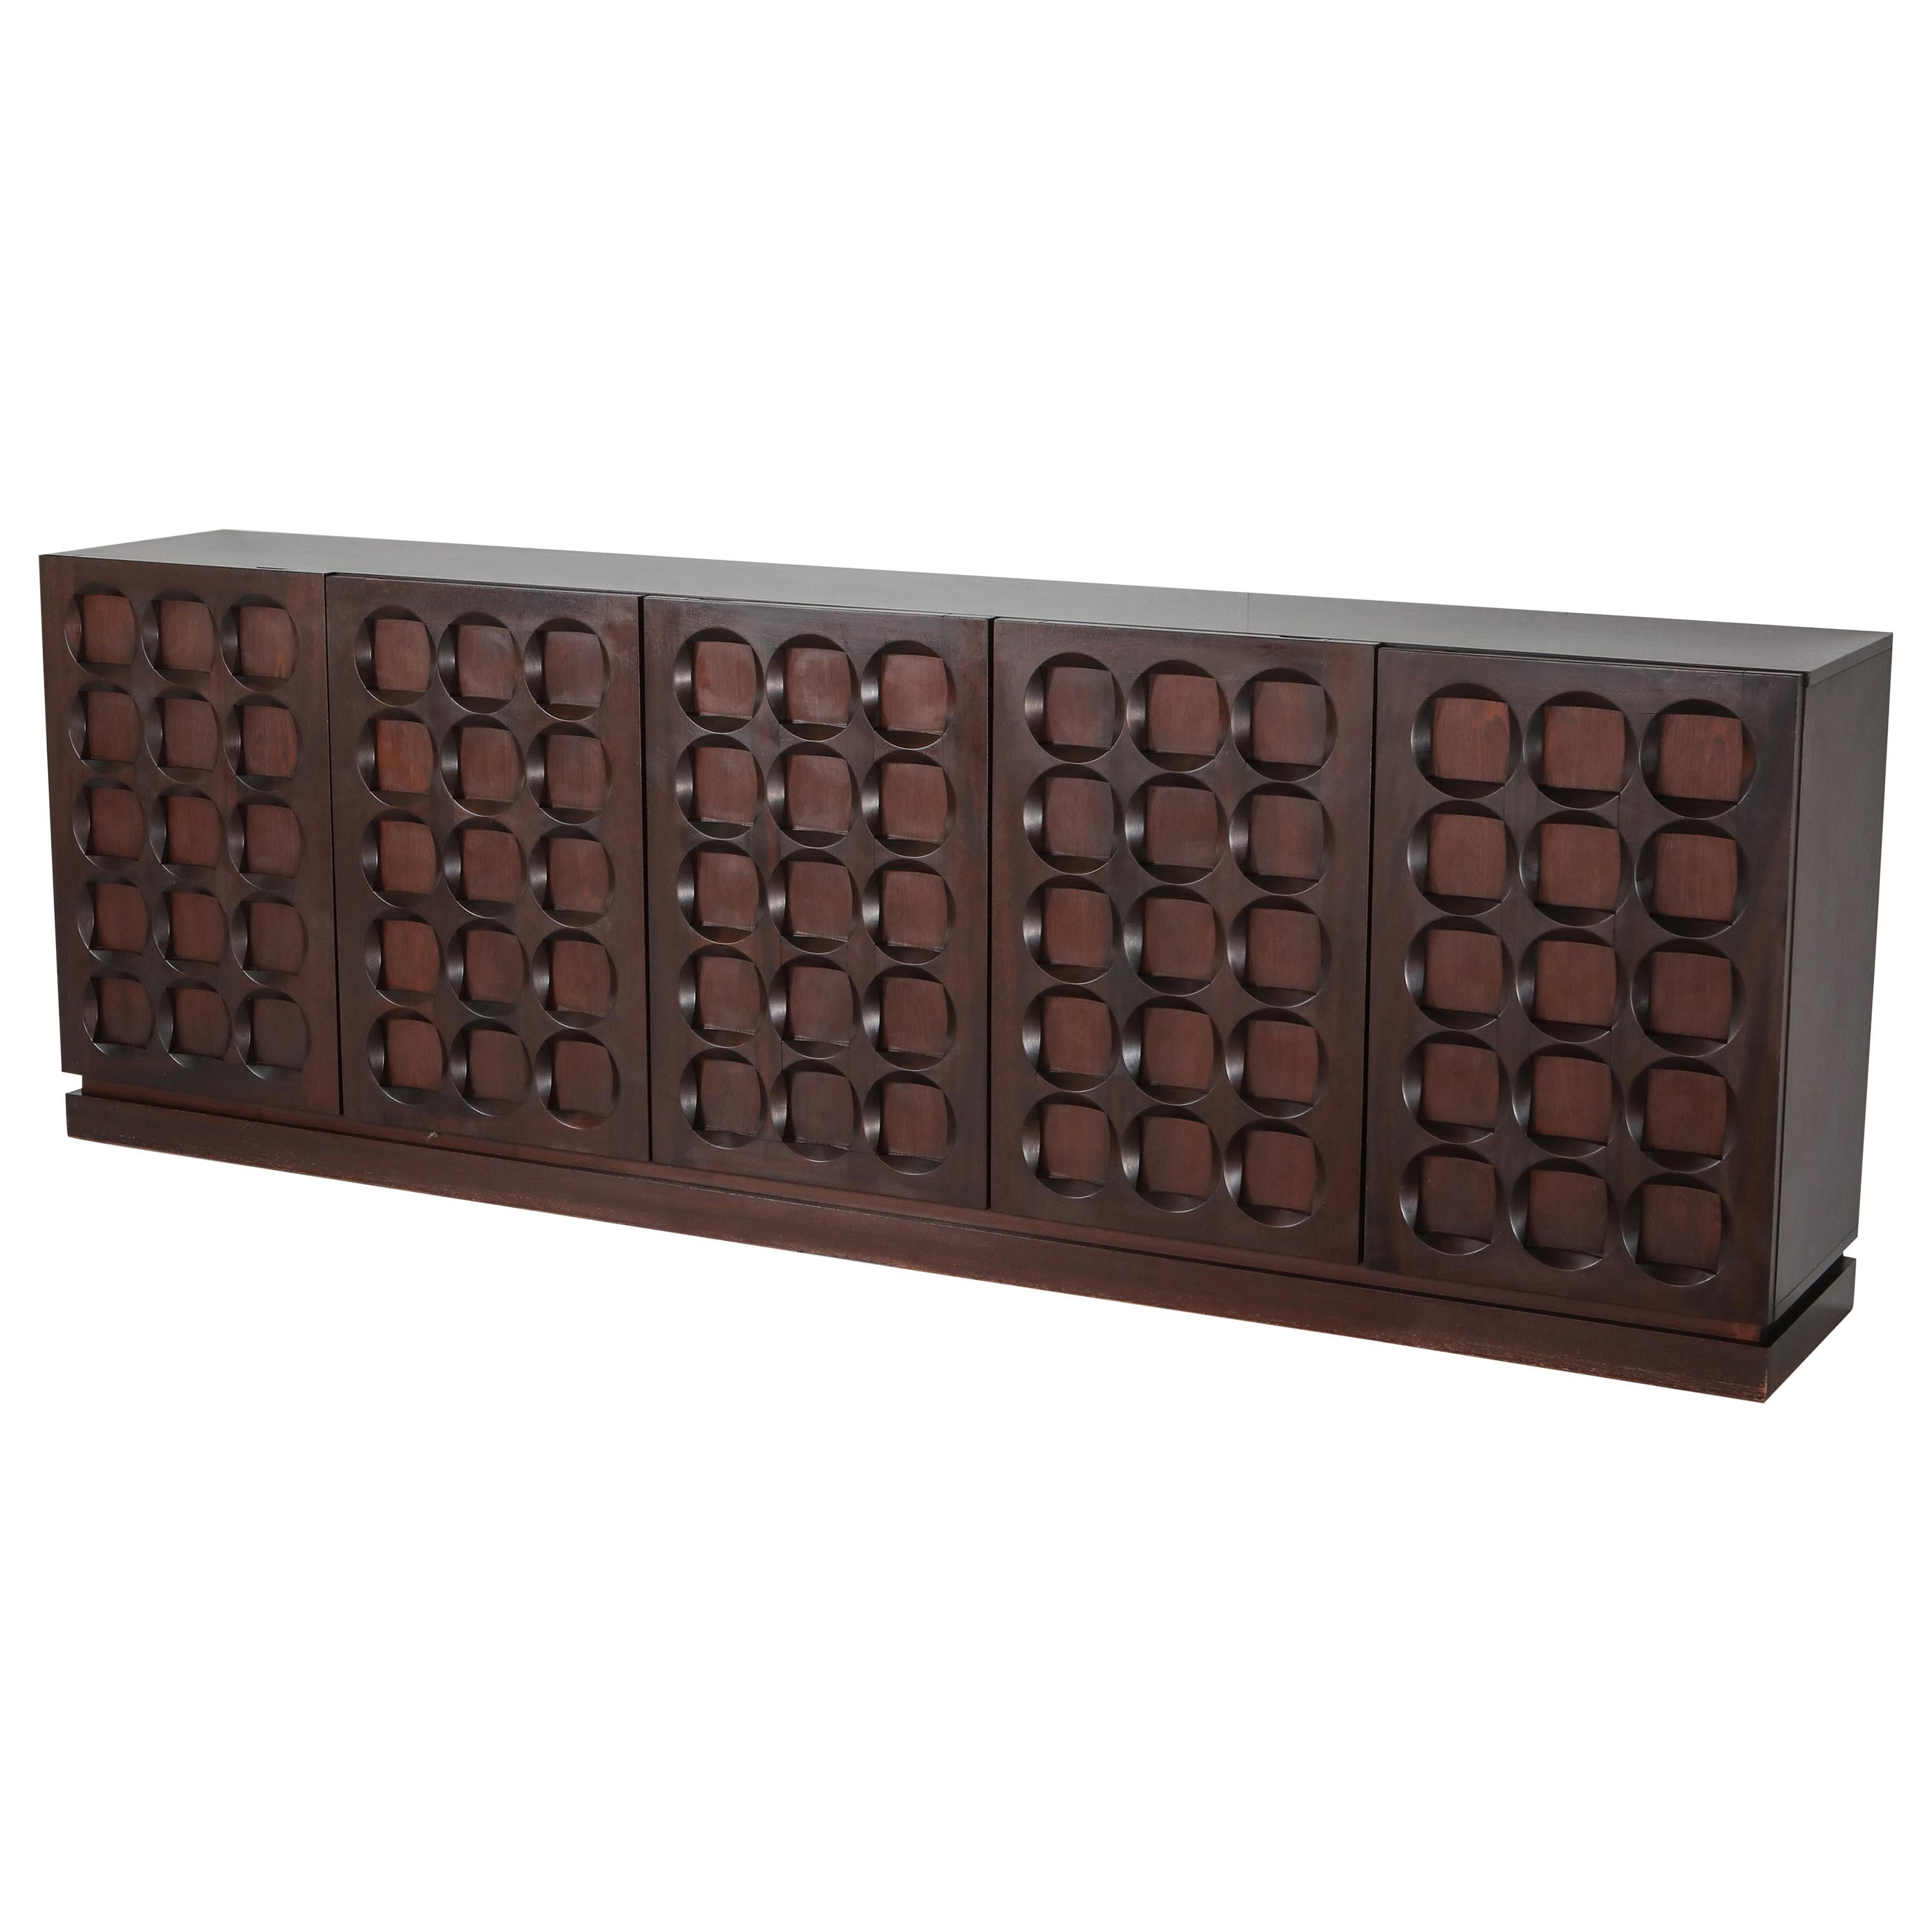 Mahogany Credenza with Geometrical Patterned Doors